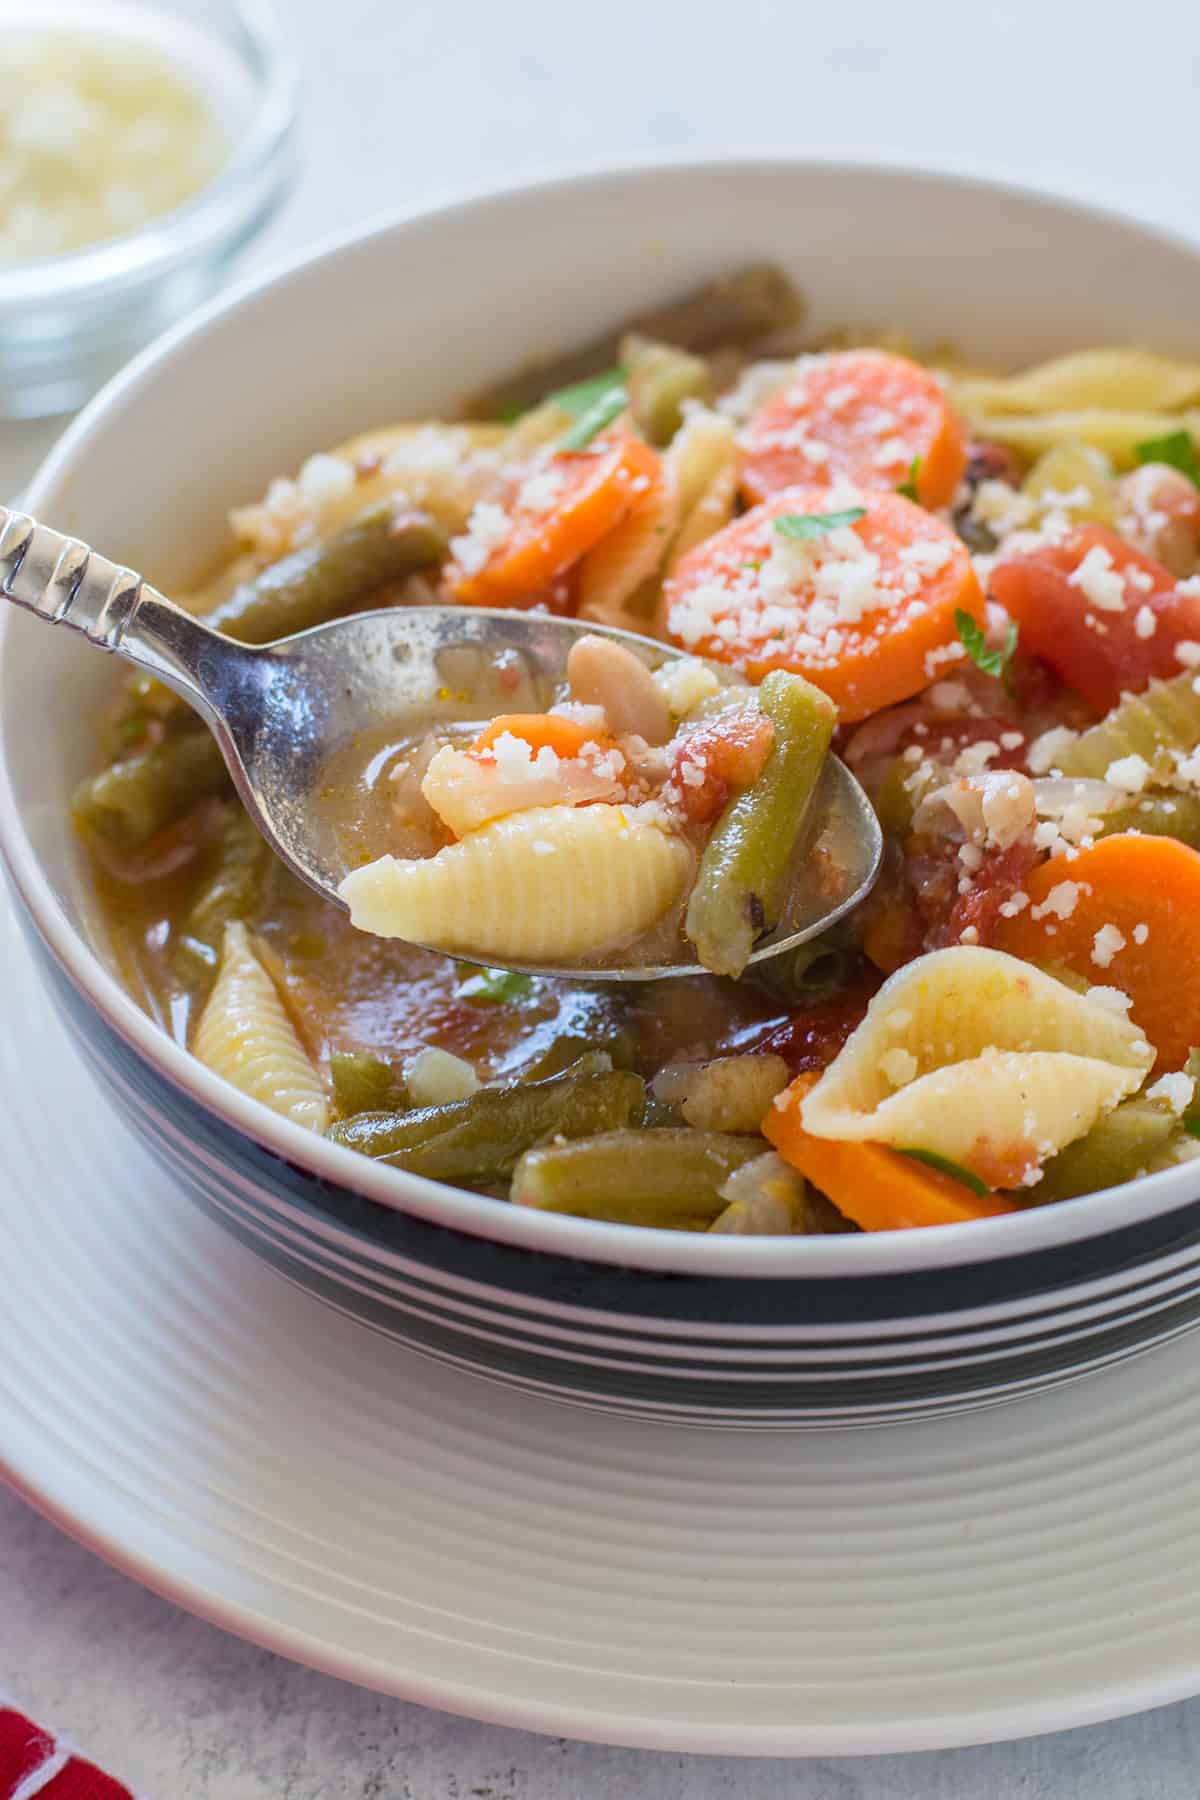 spoonful of soup with vegetables, pasta shells and white beans